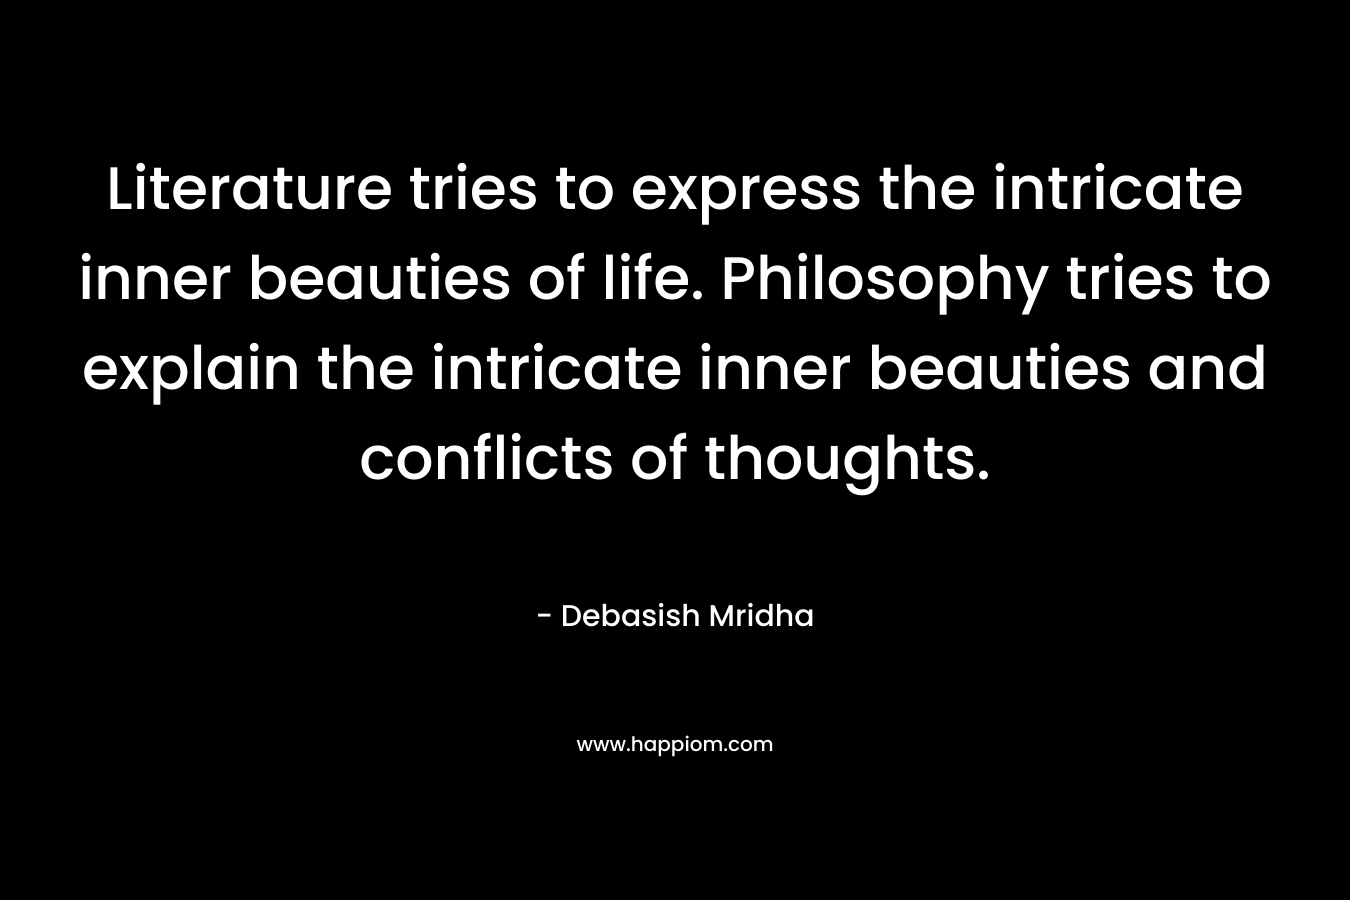 Literature tries to express the intricate inner beauties of life. Philosophy tries to explain the intricate inner beauties and conflicts of thoughts. – Debasish Mridha